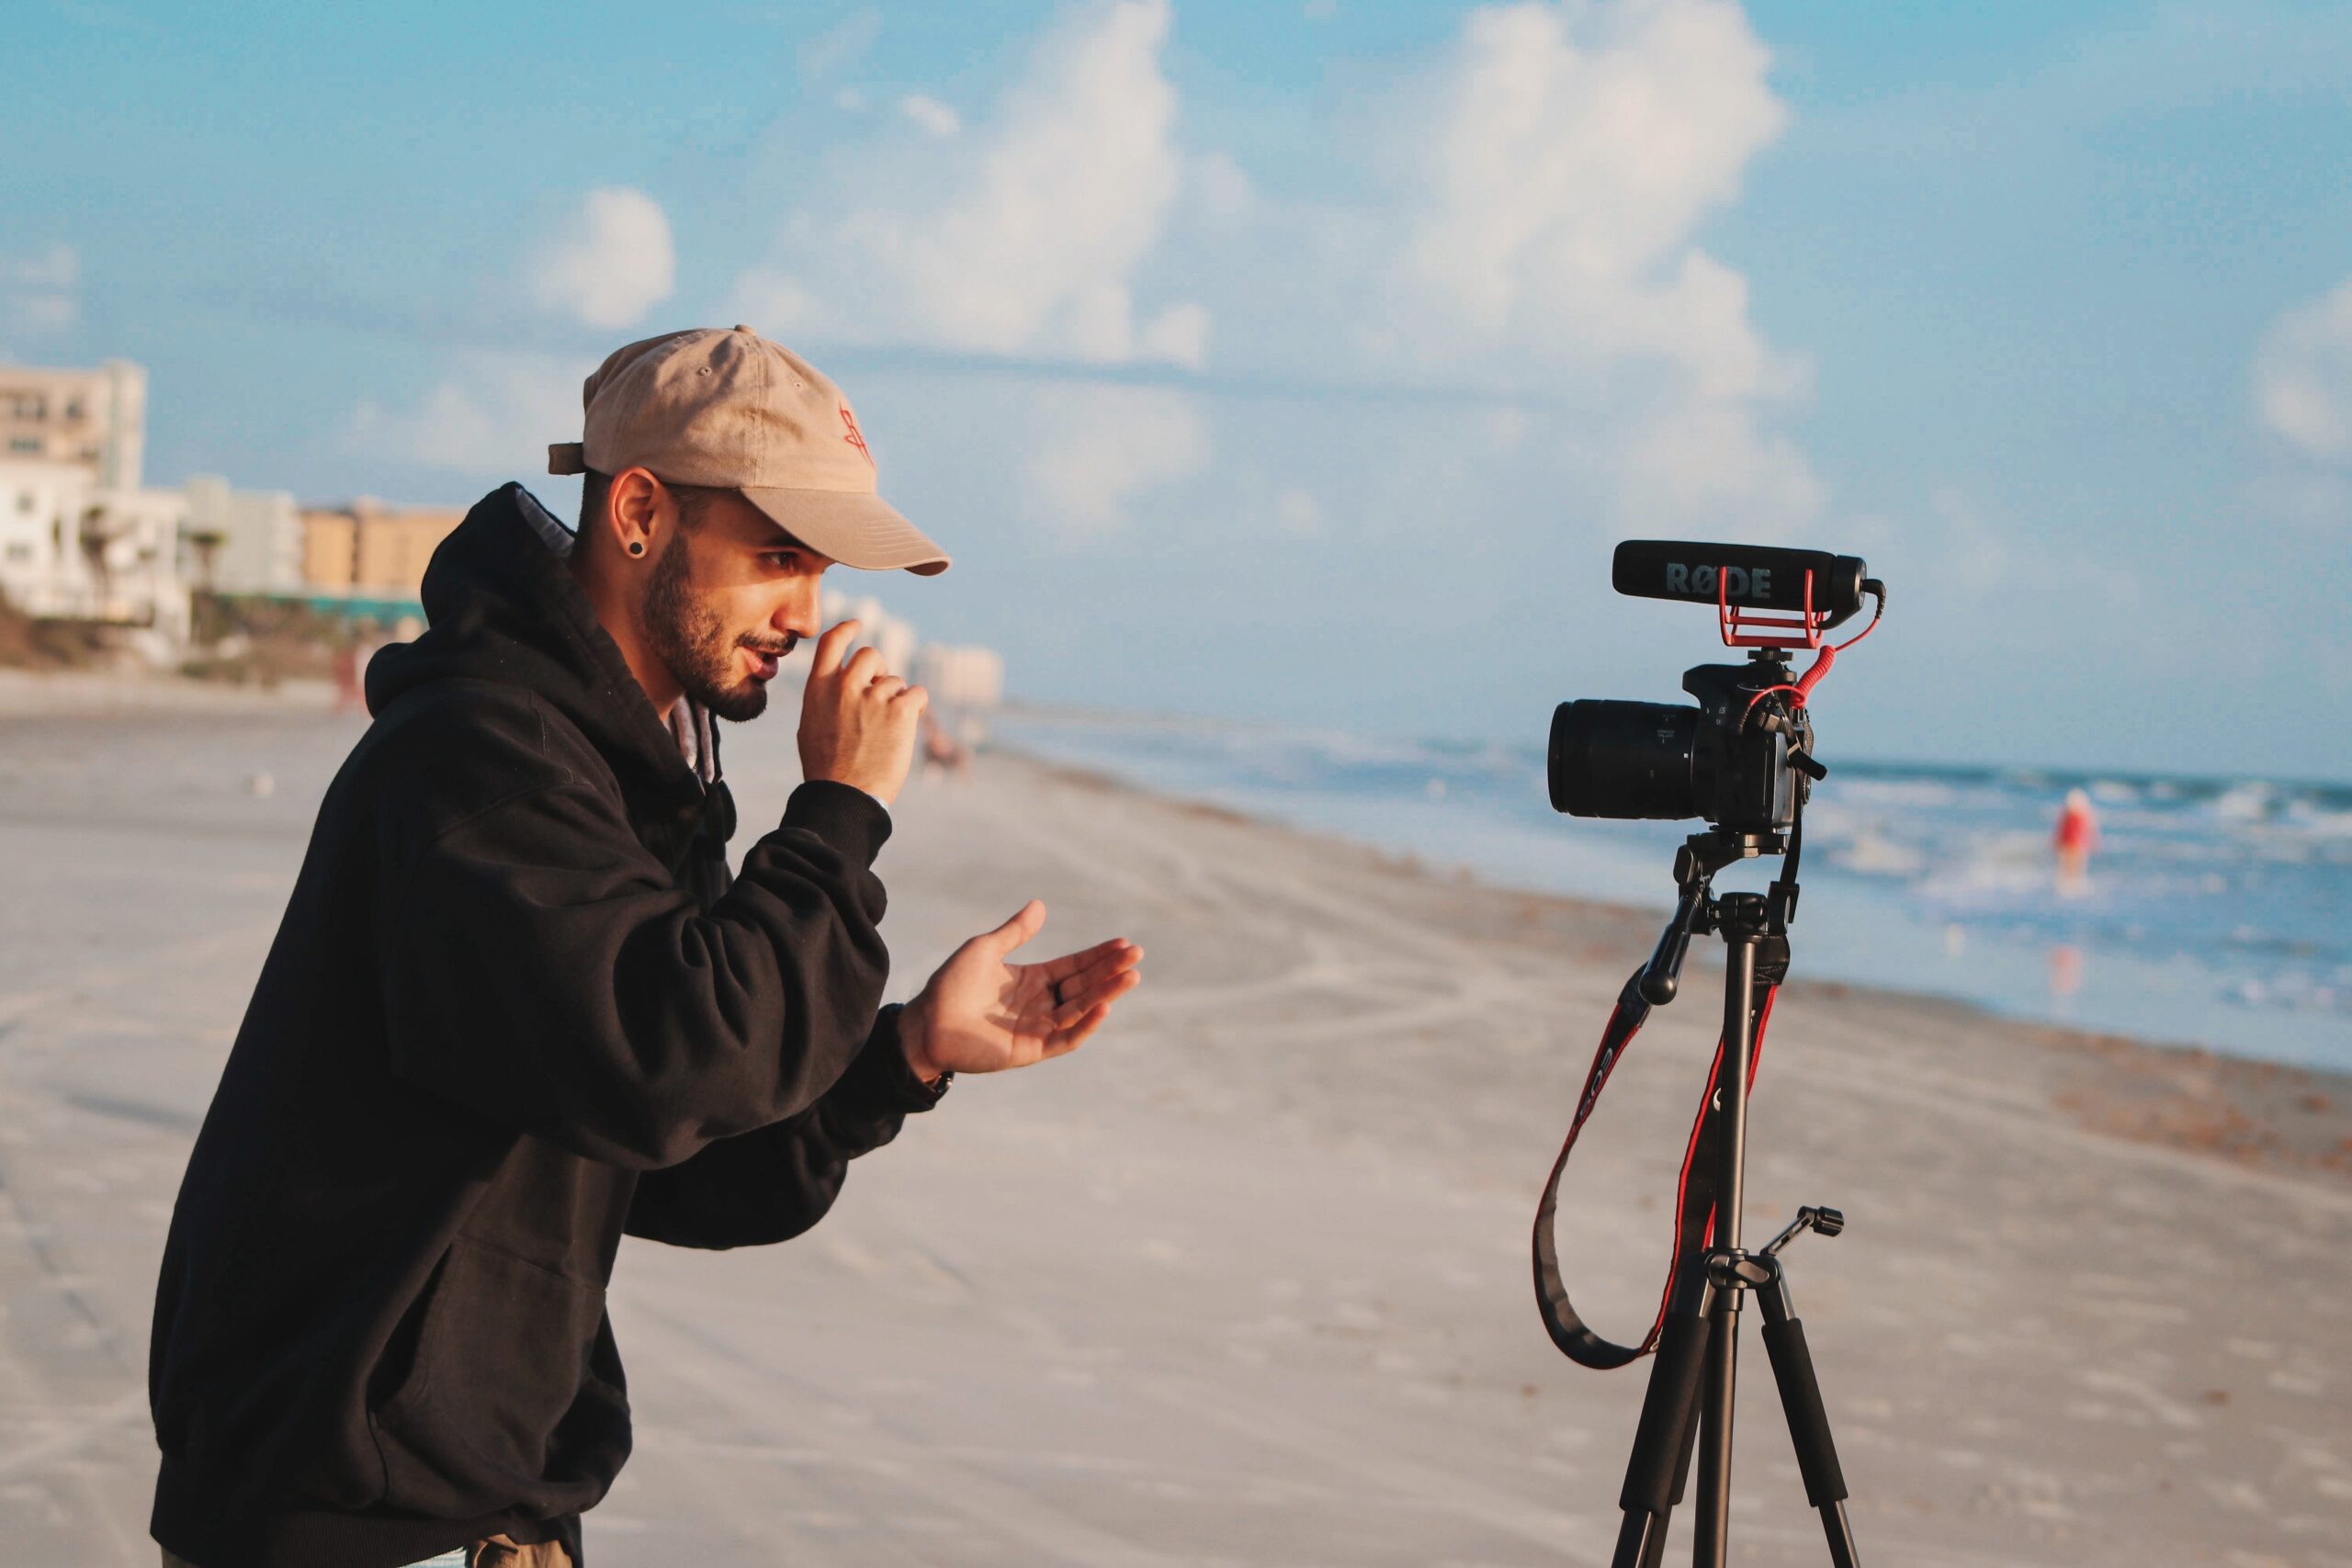 man in black jacket filming in front of camera on beach